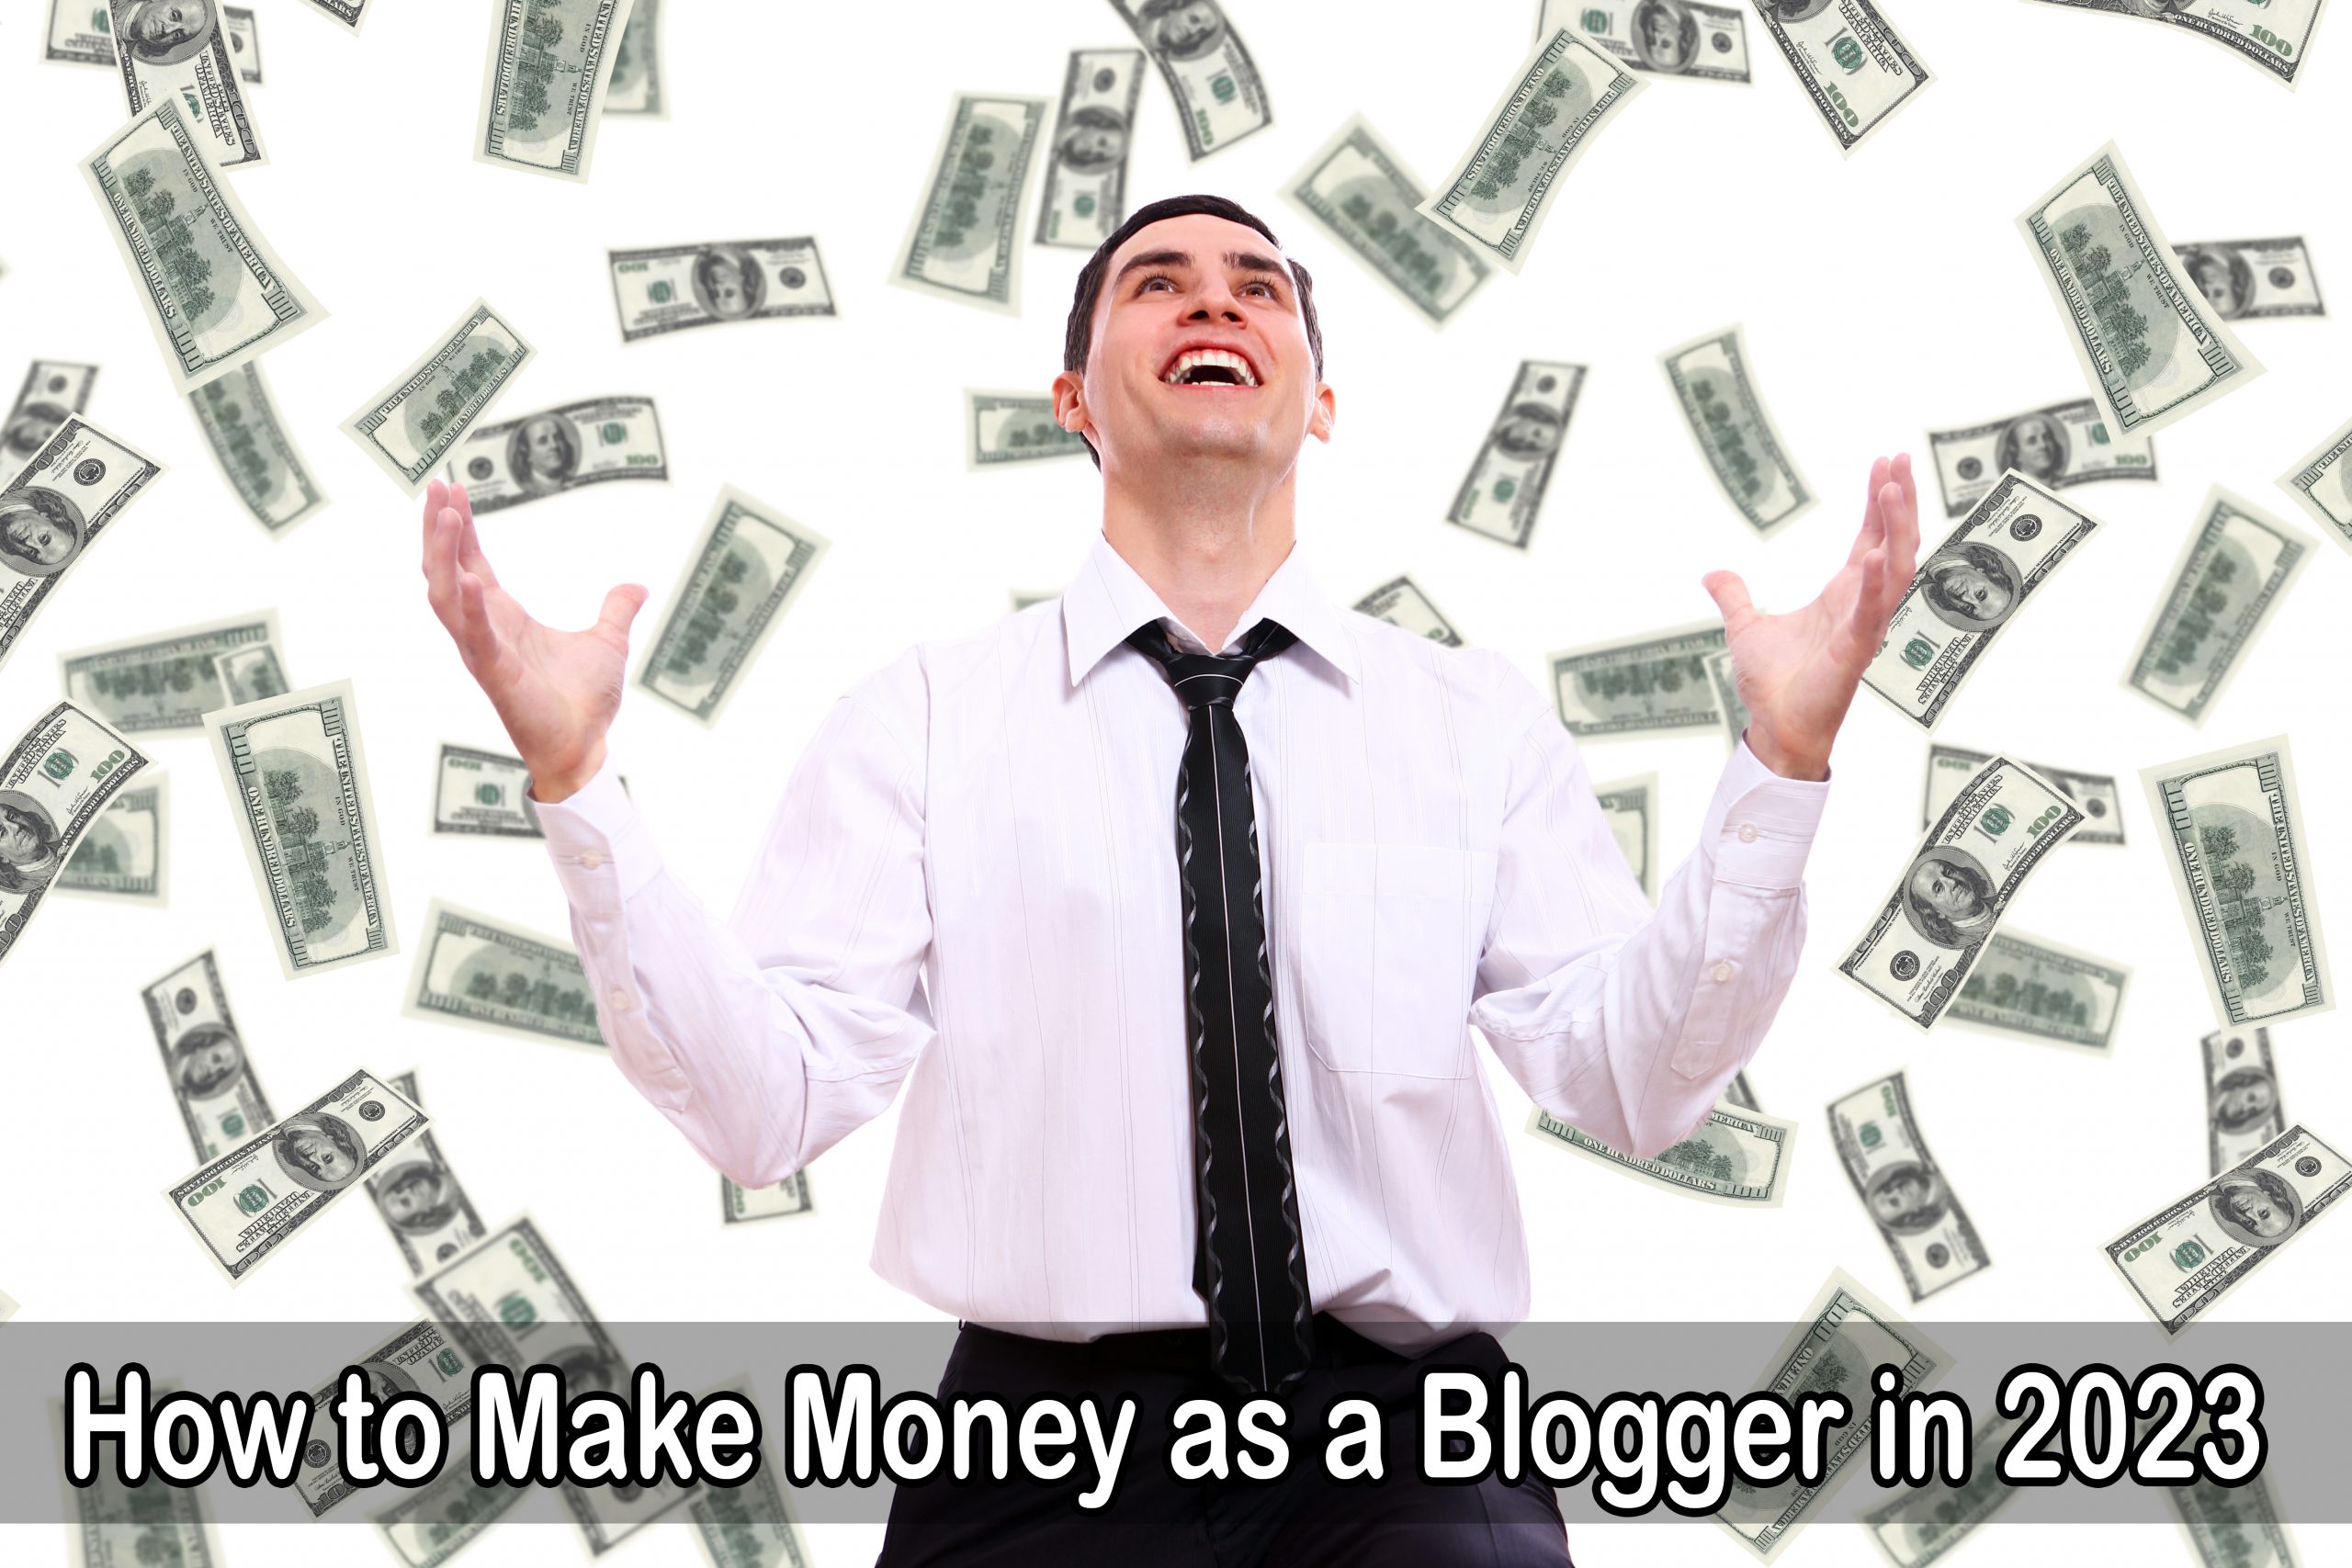 How to Make Money as a Blogger in 2023